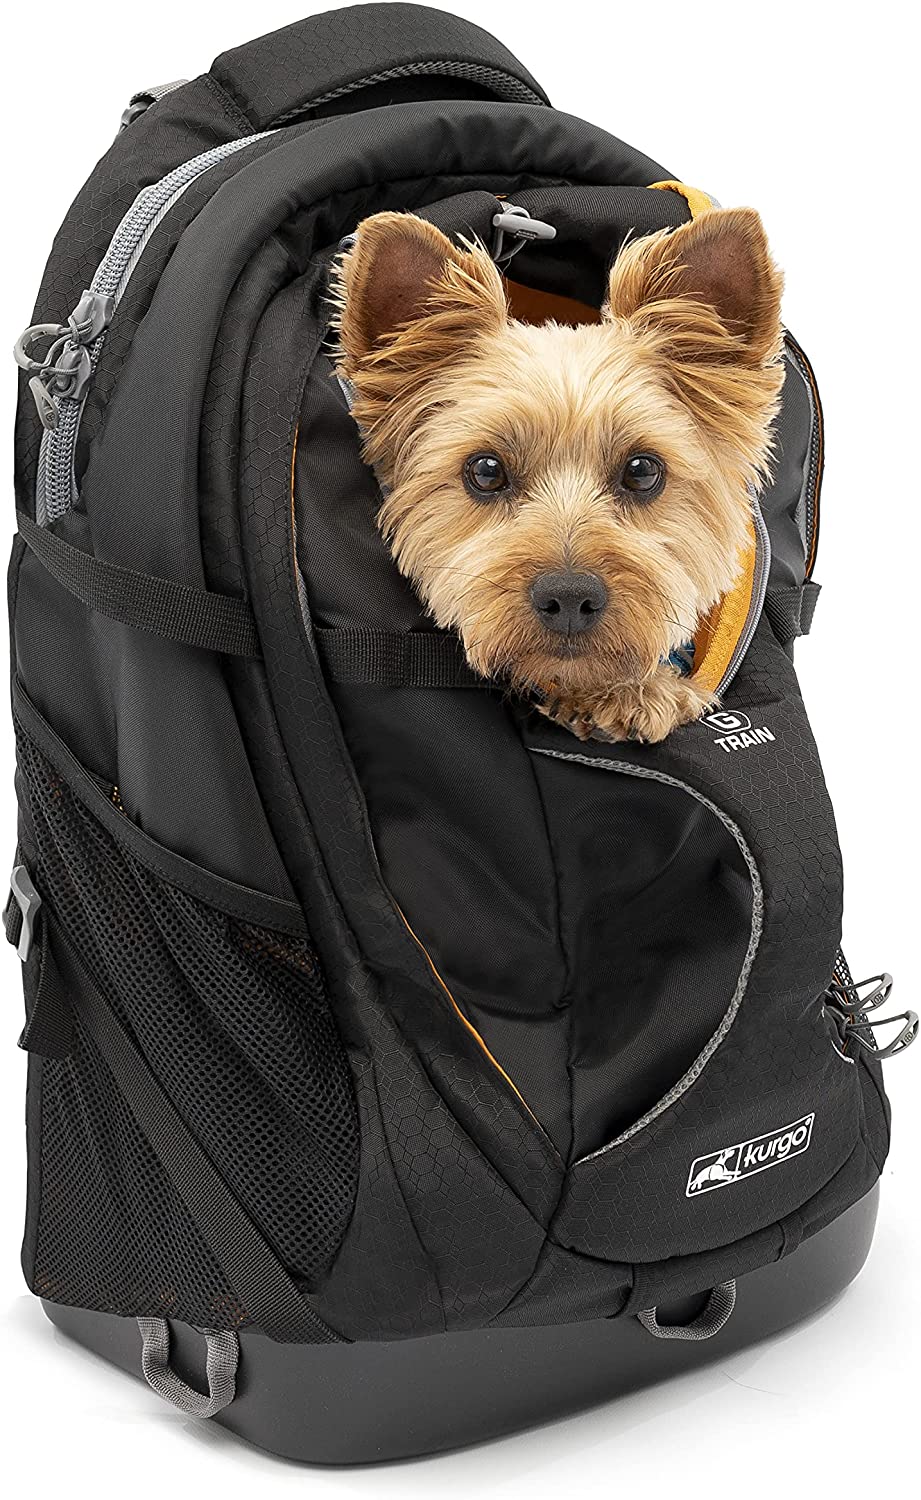 Kurgo-Dog-Carrier-Backpack-for-Small-Pets